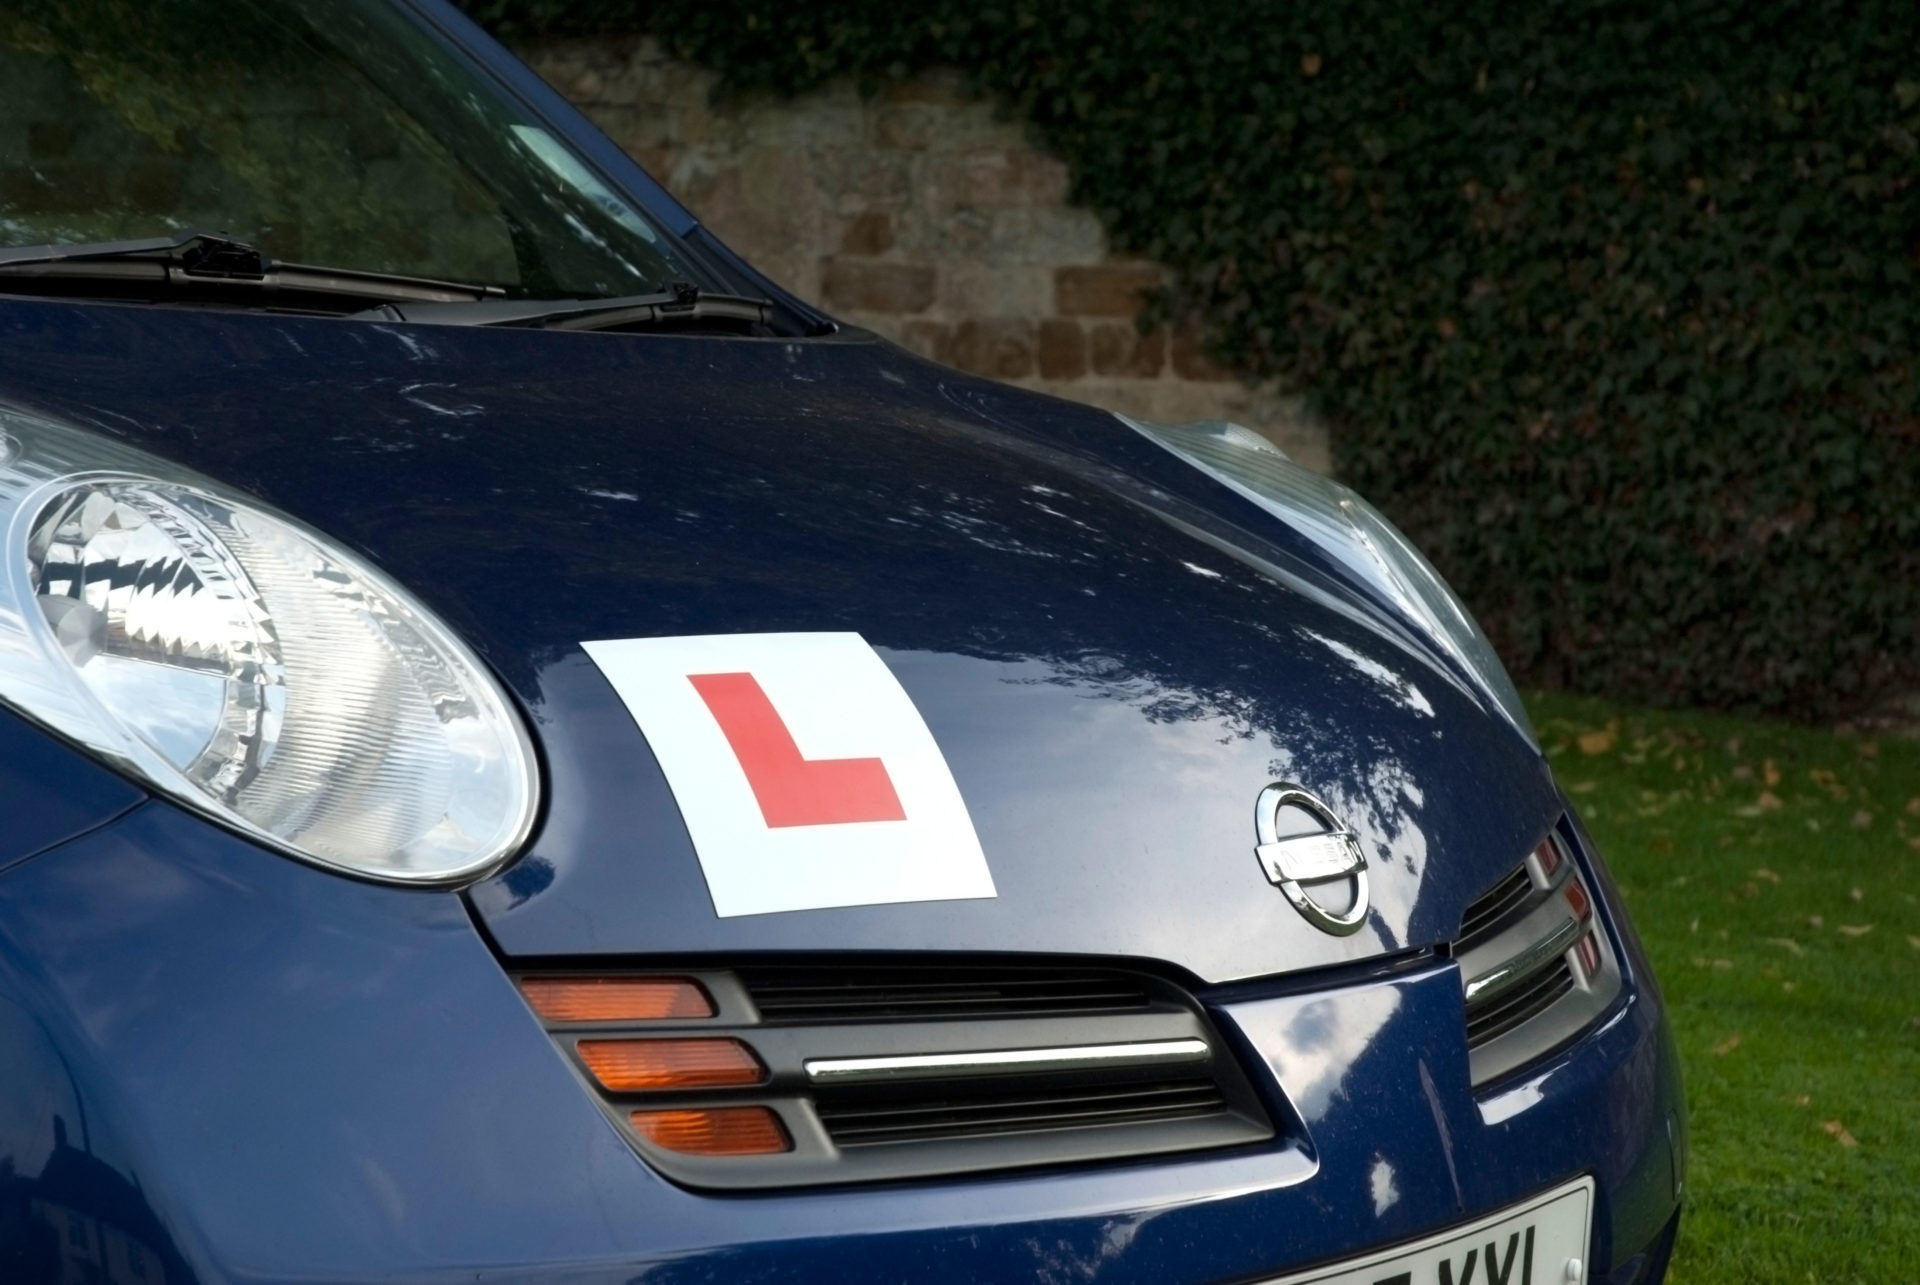  A learner driver sticker on a car, 22-9-10